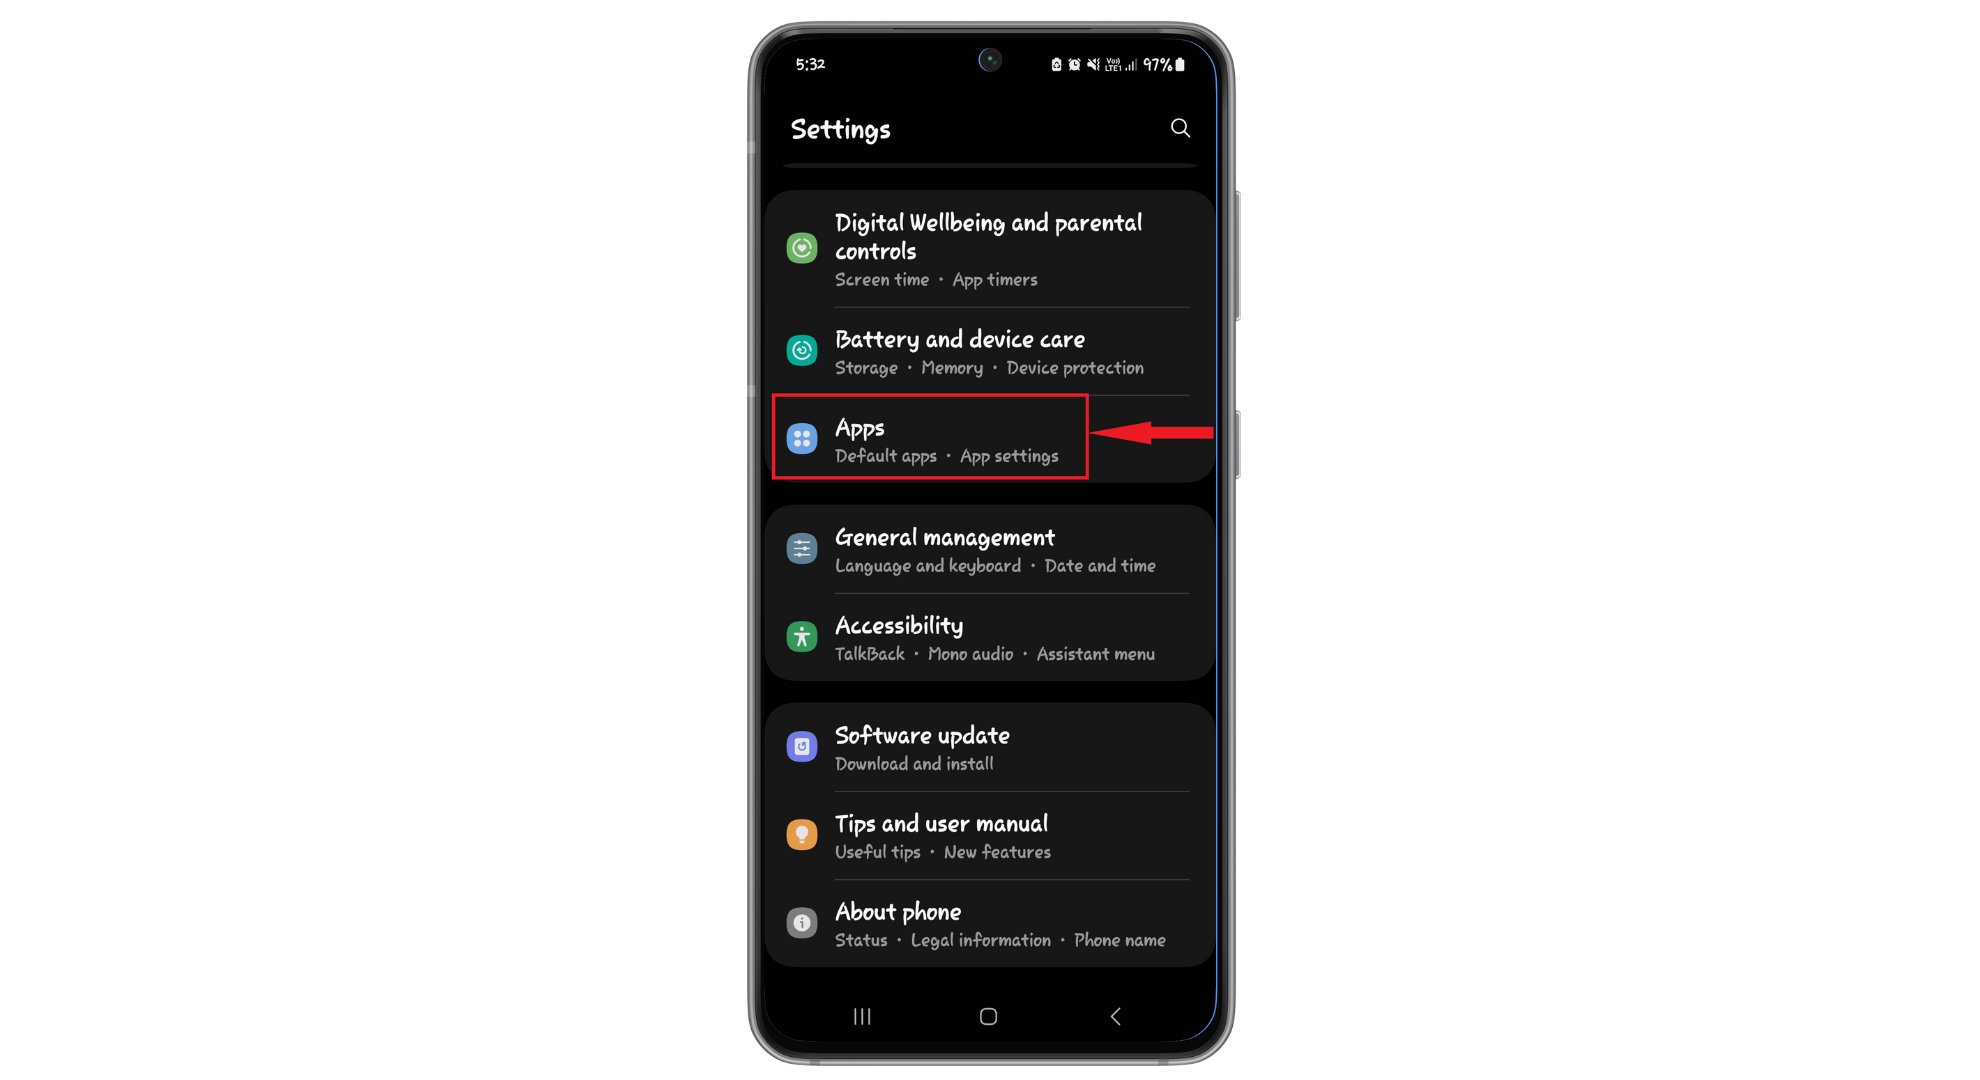 Go to Apps settings